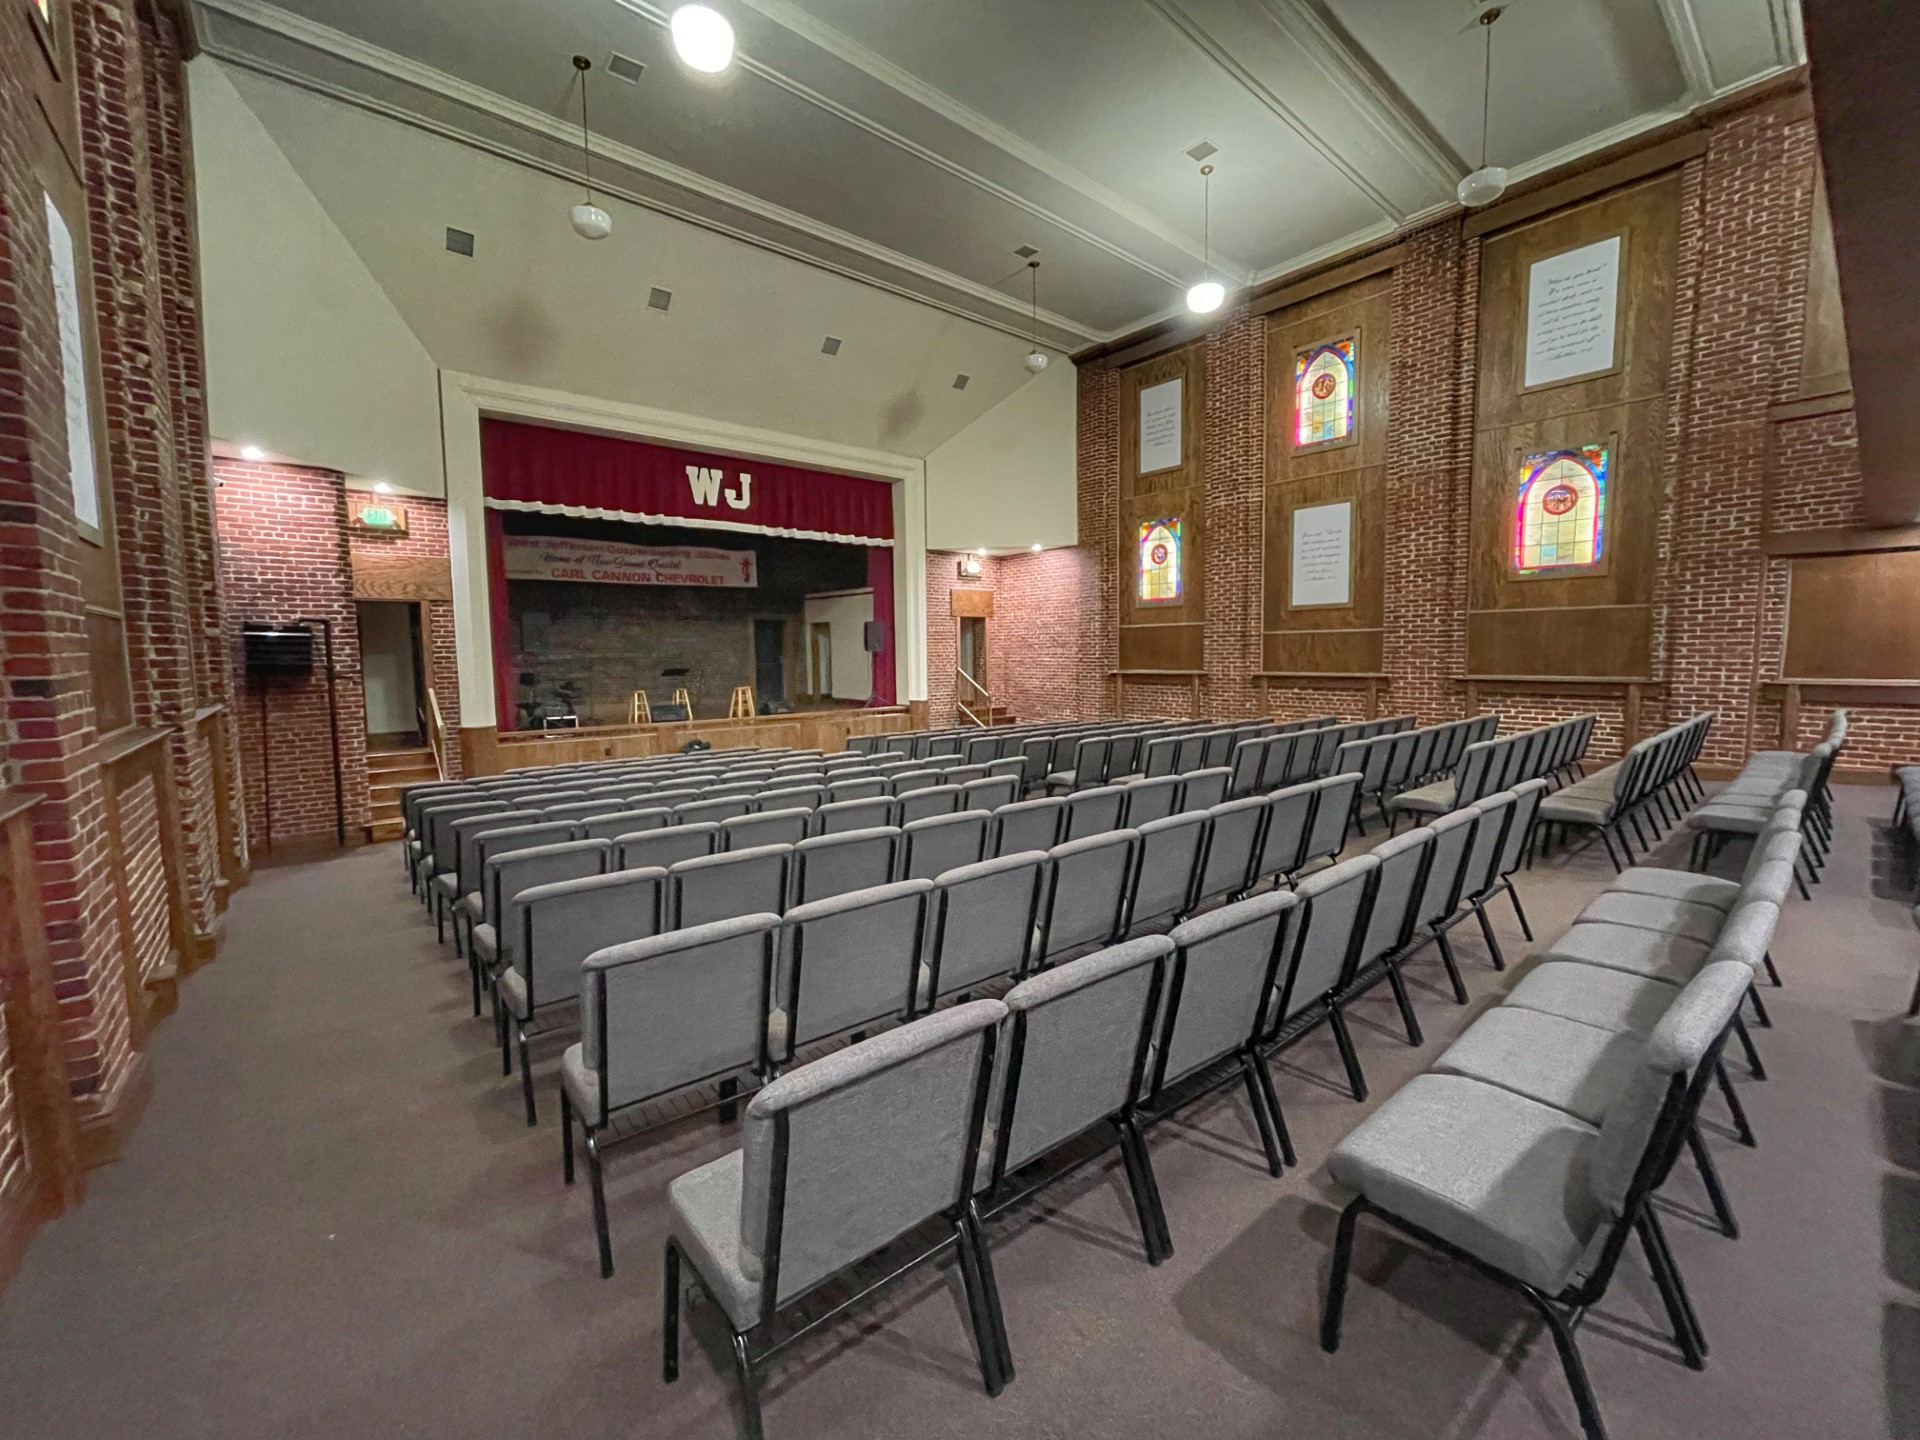 Auditorium Town of West Jefferson Town Hall Rental Space